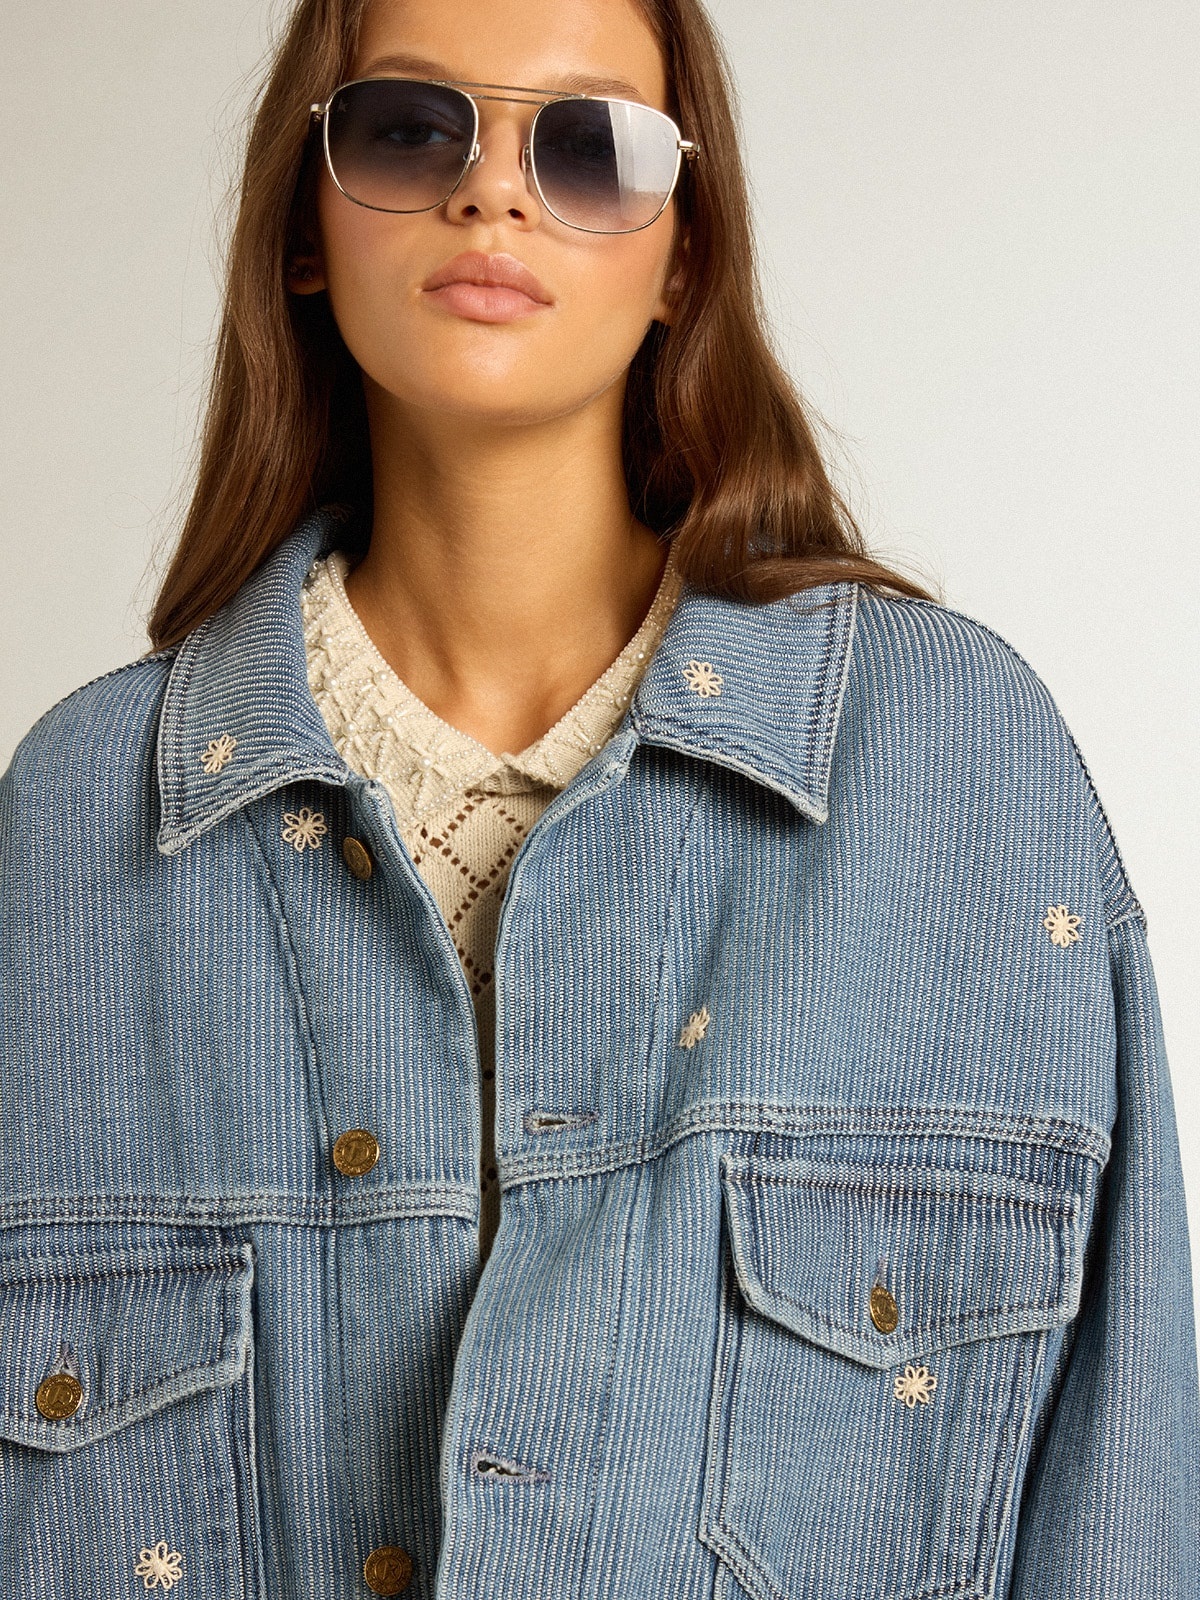 Women's denim jacket with floral embroidery - 2